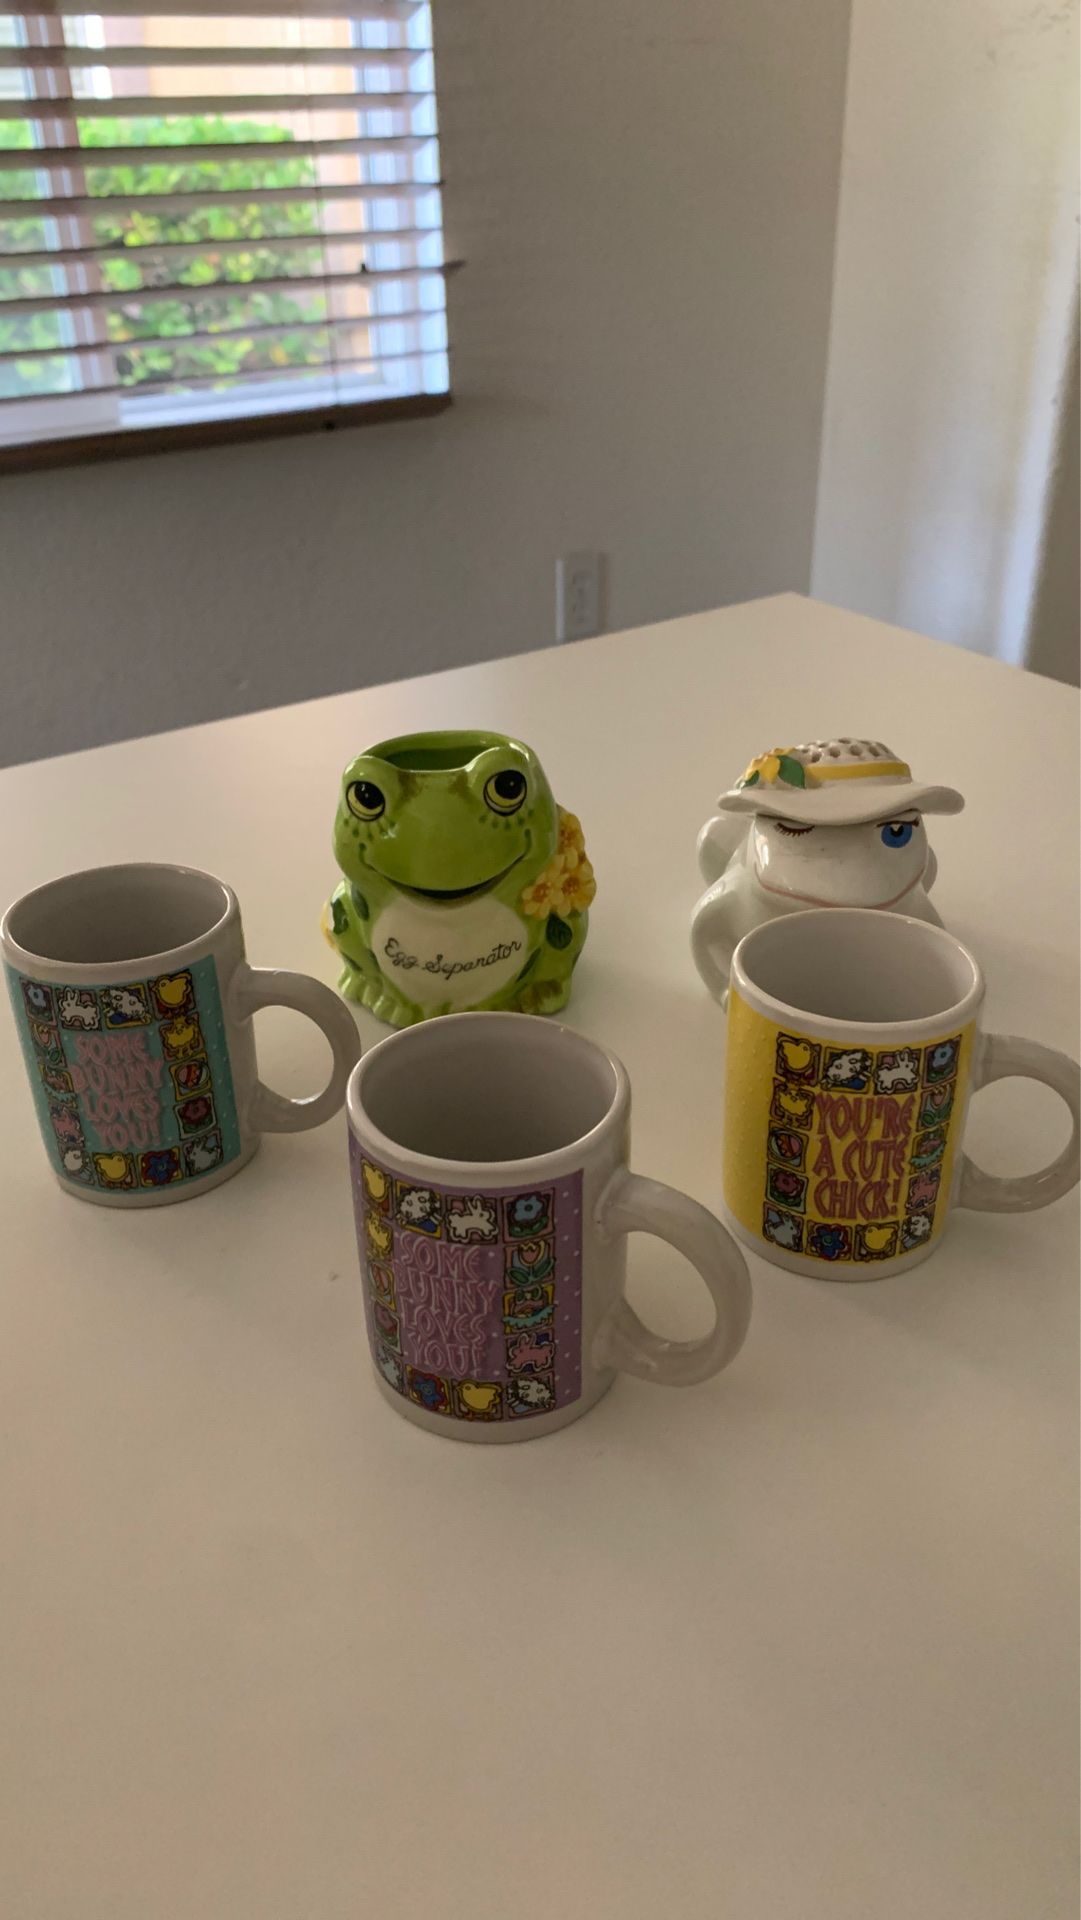 Small cups, and froggys